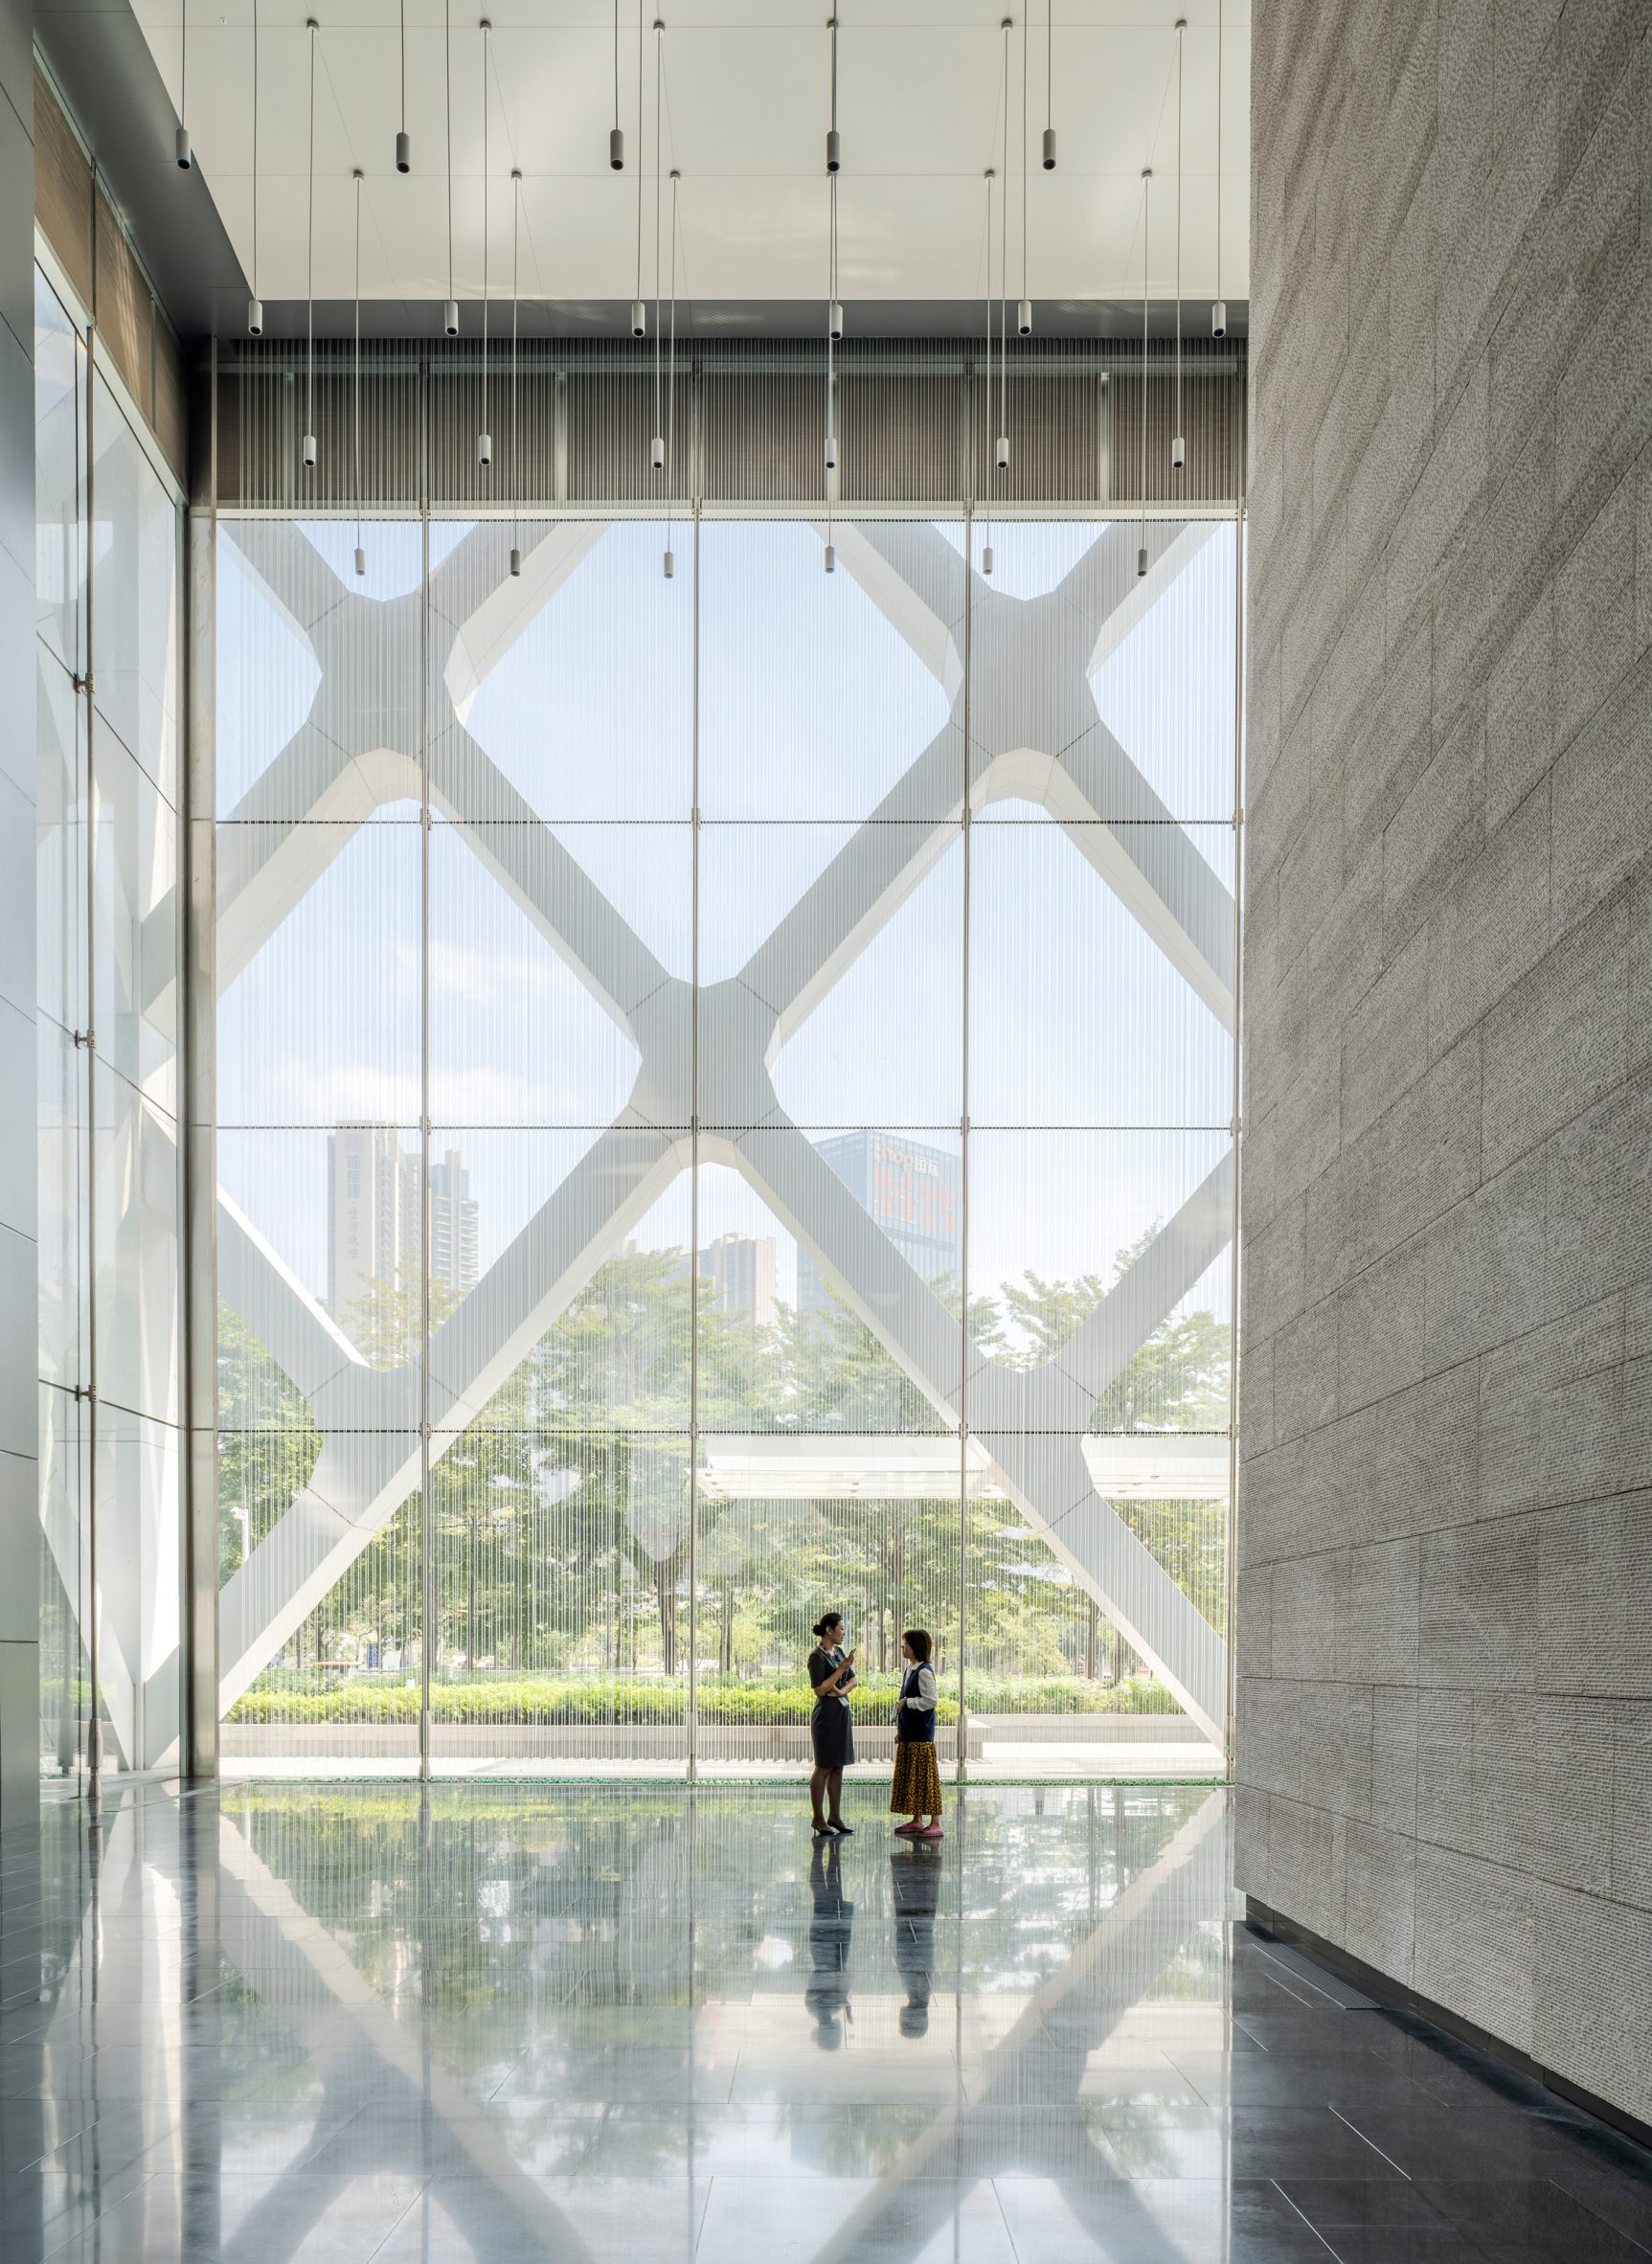 Lobby of SOM's Shenzhen bank building with stone-clad walls on one side and rain-curtain feature in the foreground and exterior diagrid structure visible behind it